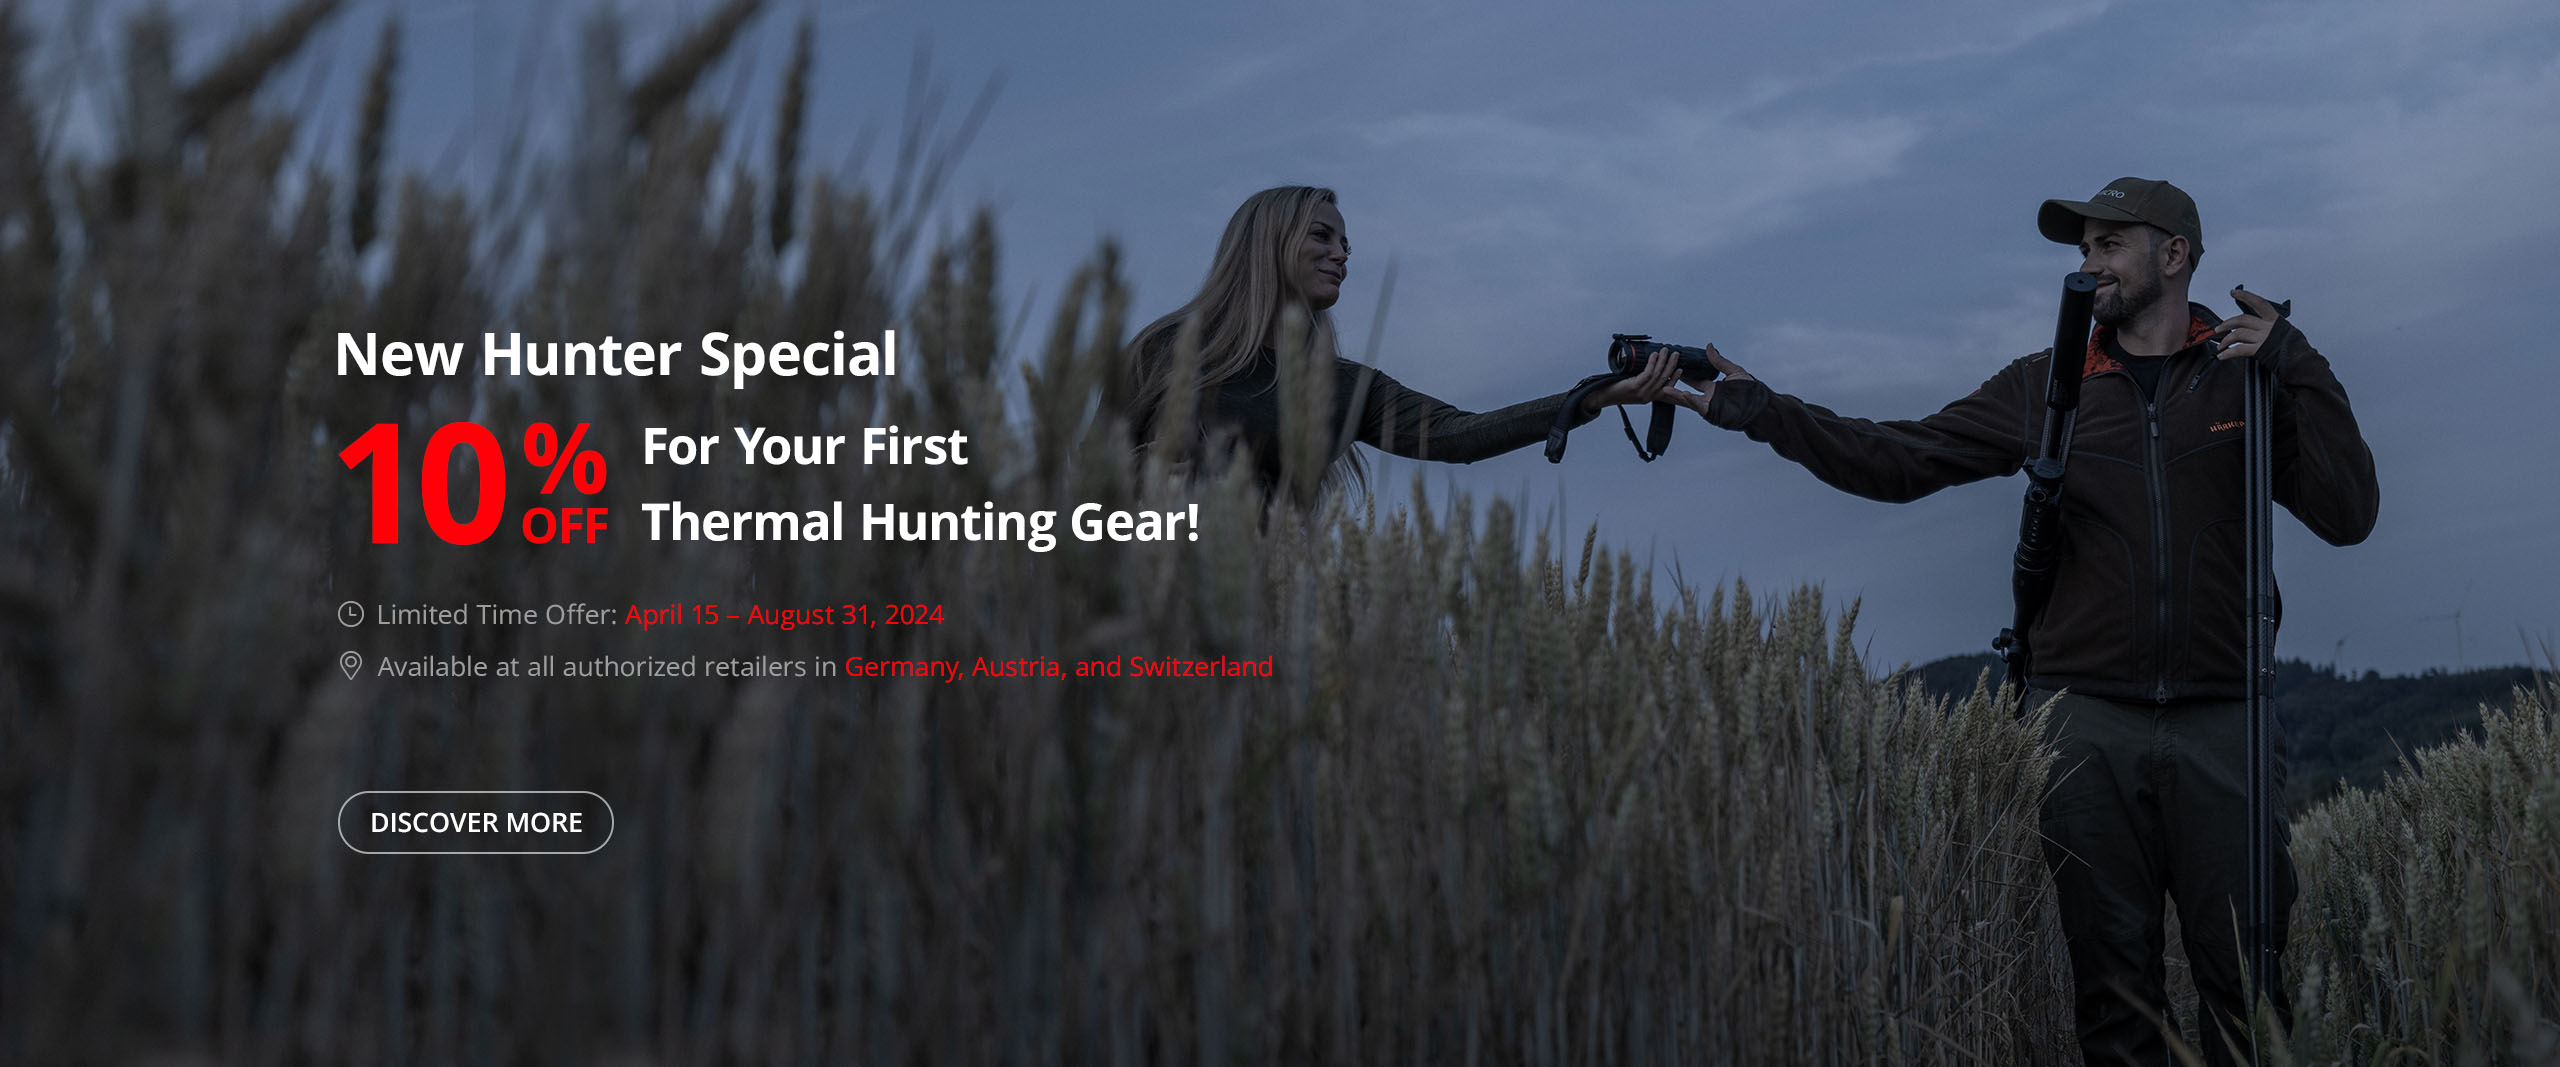 New Hunter Special Banner_PC